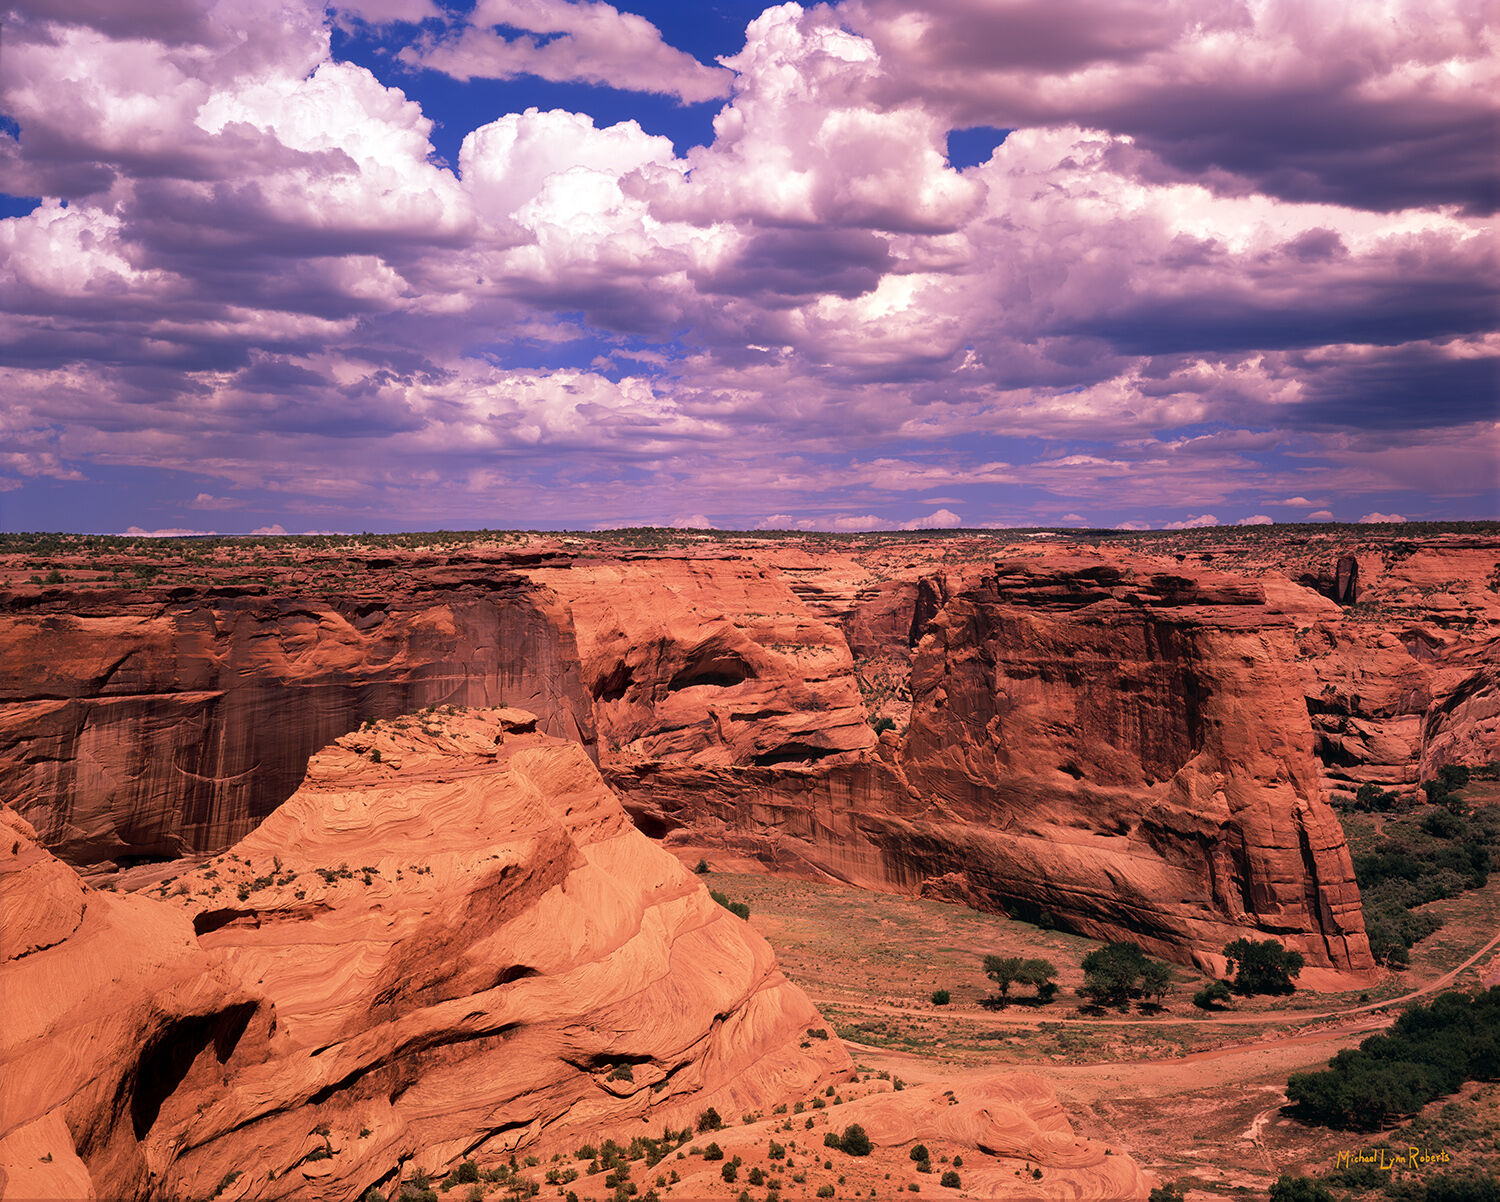 Canyon de Chelly (de shay) National Monument in Chinle, Arizona is deep in the heart of Dinetah, the "Big Rez" of the Navajo...